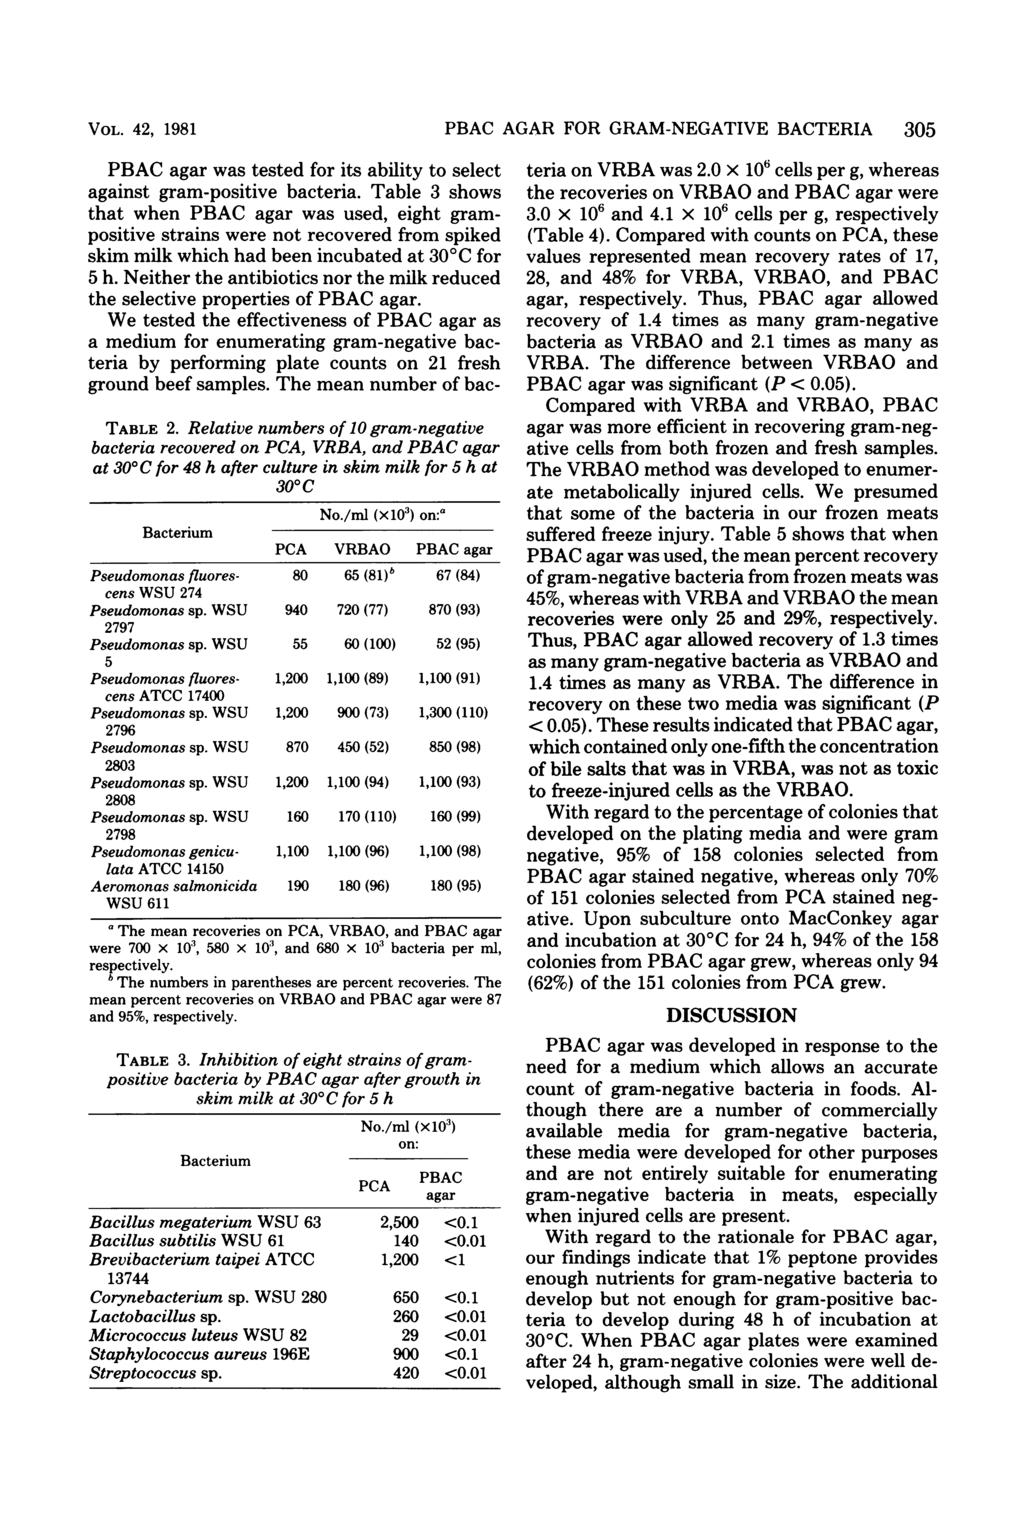 VOL. 42, 1981 PBAC agar was tested for its ability to select against gram-positive bacteria.